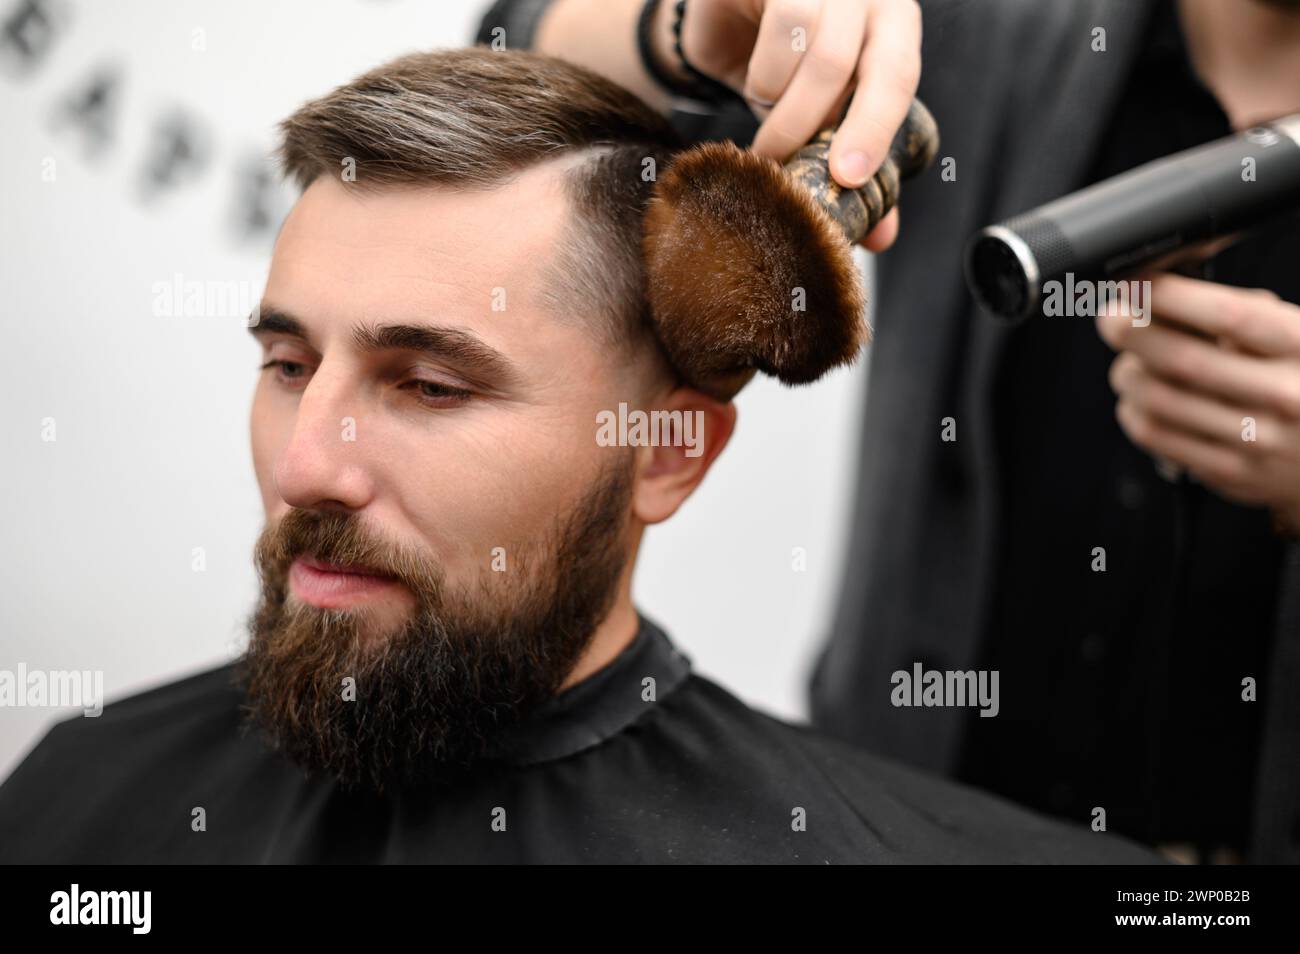 The hairdresser sweeps the hair during the haircut with a brush and cold drying air. Stock Photo